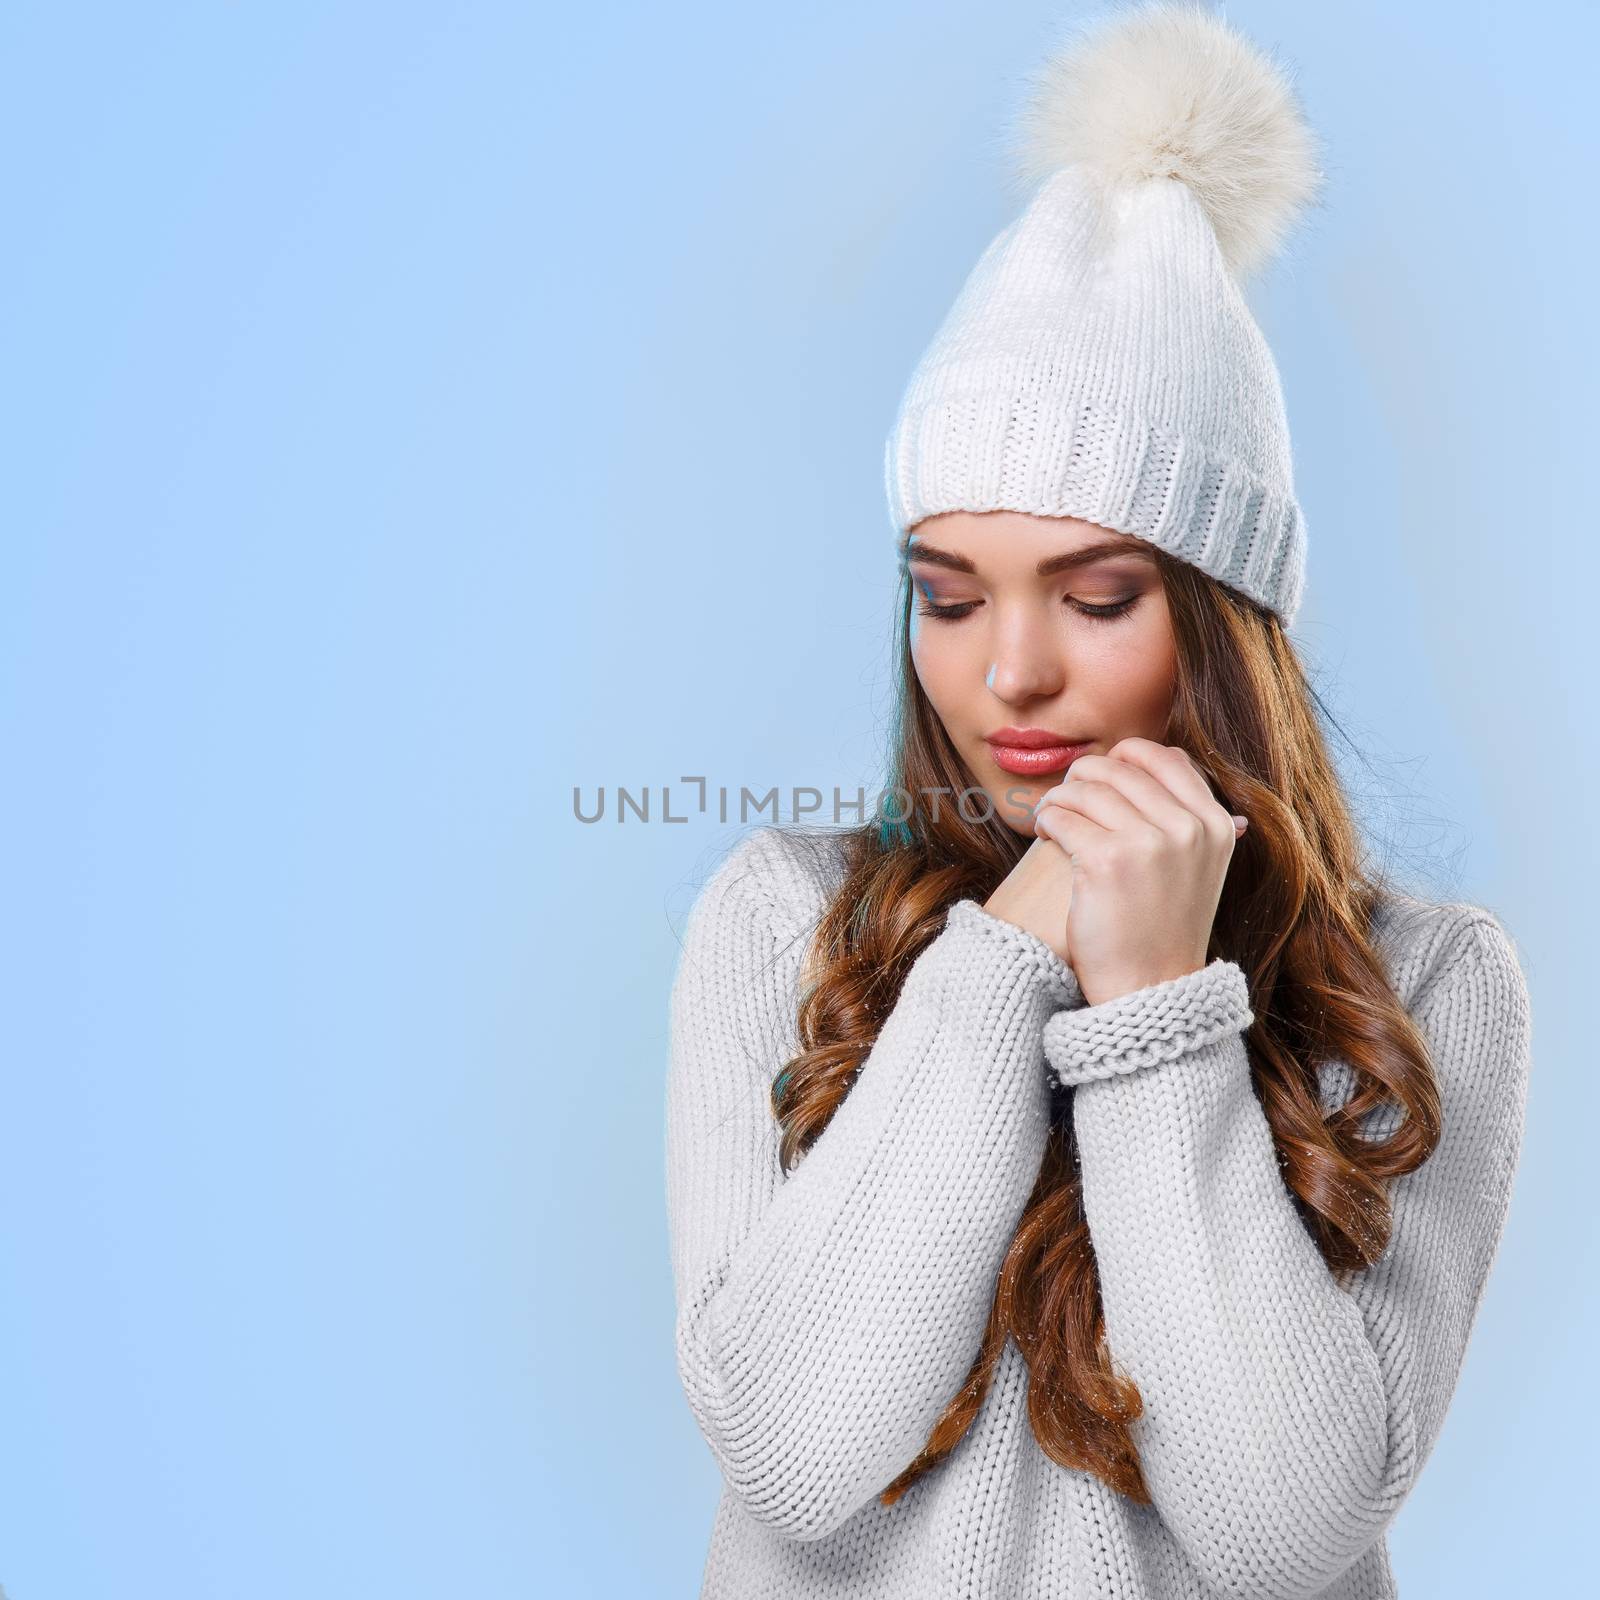 Winter. Cute girl on a blue background